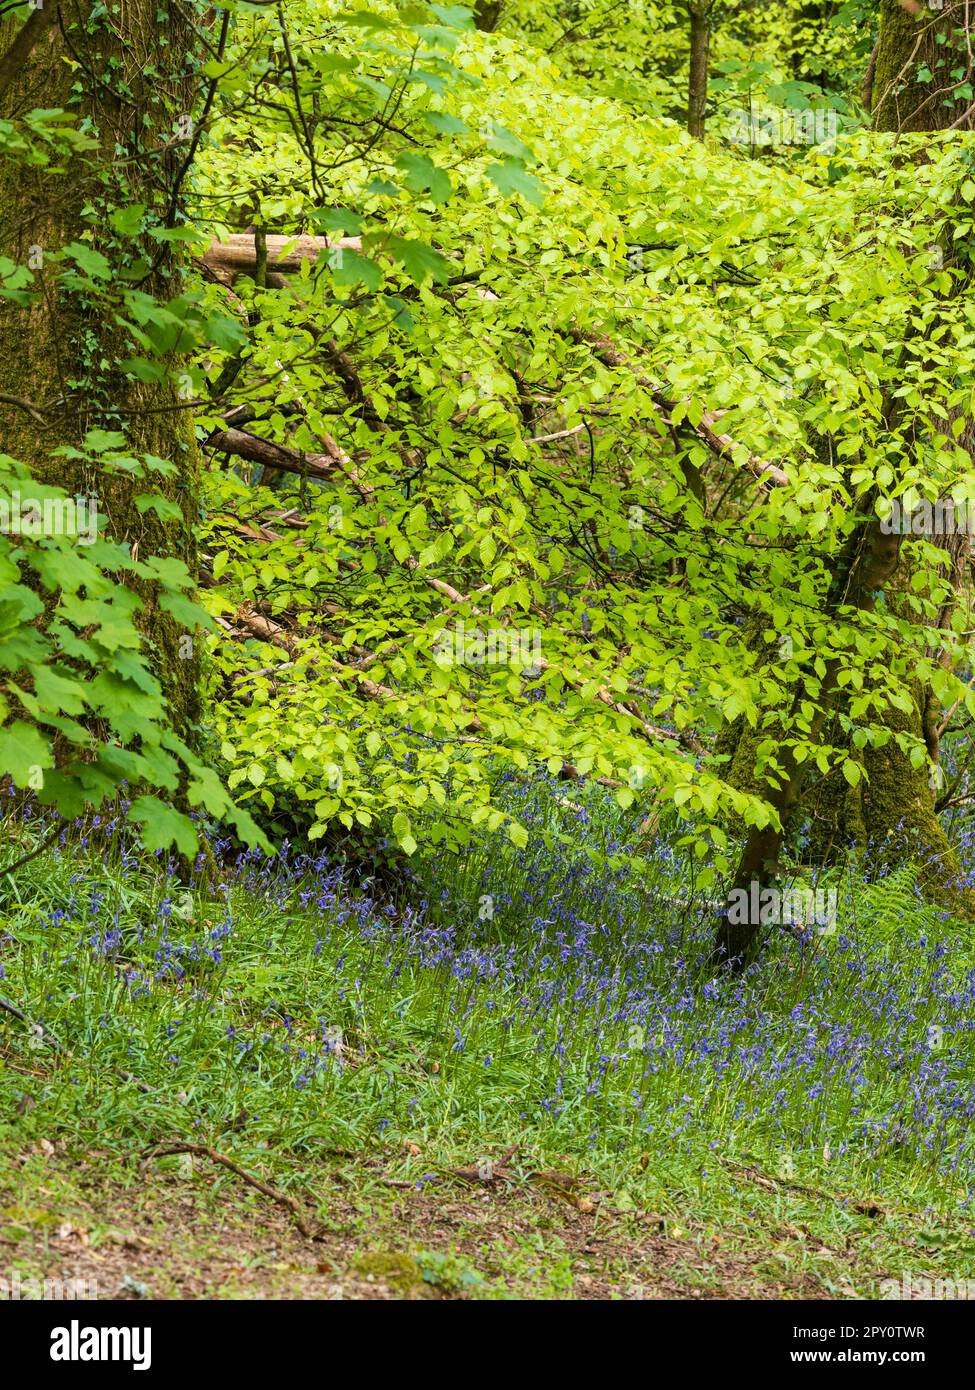 English bluebells, Hyacinthoides non-scripus, under a spring canopy of beech, Fagus sylvatica, in a Plymouth, Devon, UK woodland Stock Photo